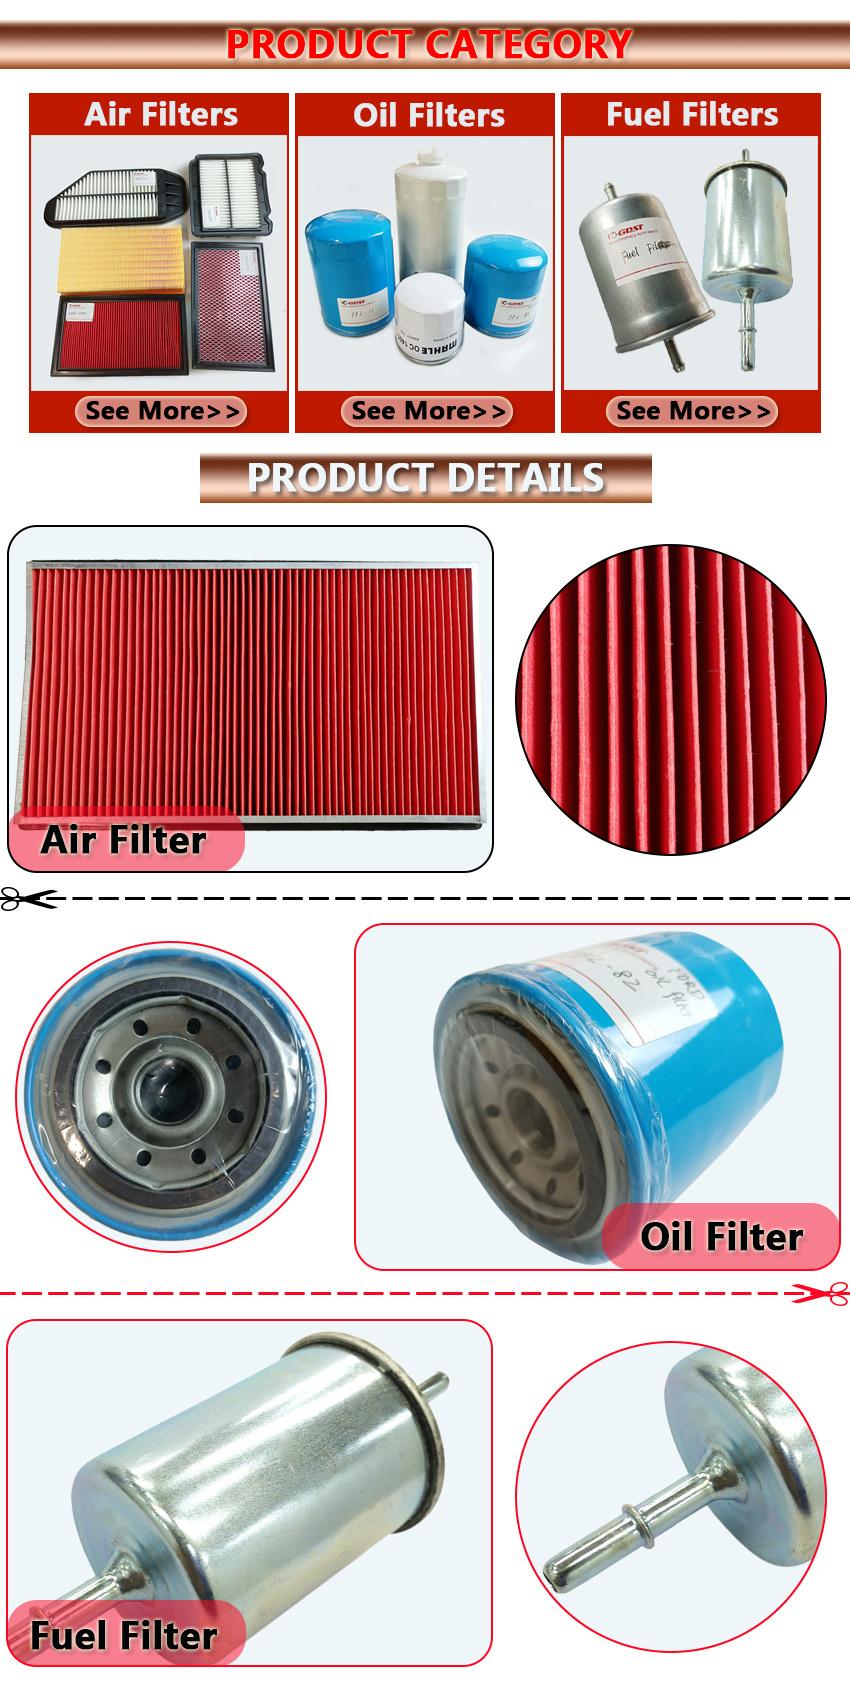 Gdst Factory Price Good Quality Ail Filters OEM 96536696 for Chevrolet Aveo